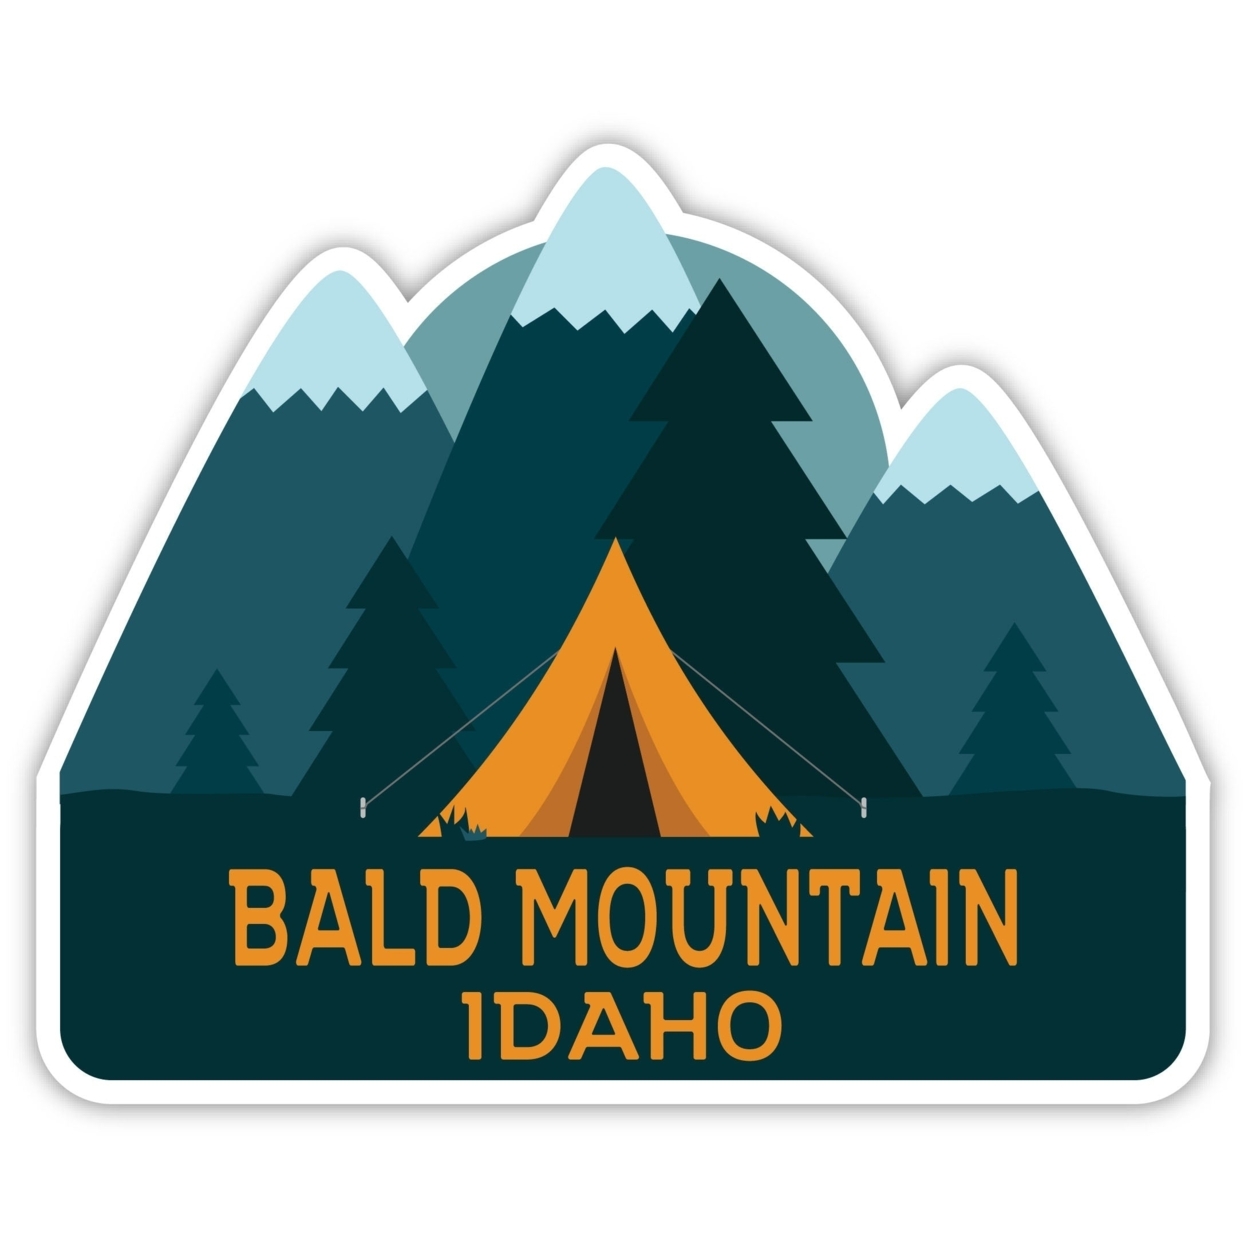 Bald Mountain Idaho Souvenir Decorative Stickers (Choose Theme And Size) - 4-Pack, 8-Inch, Tent